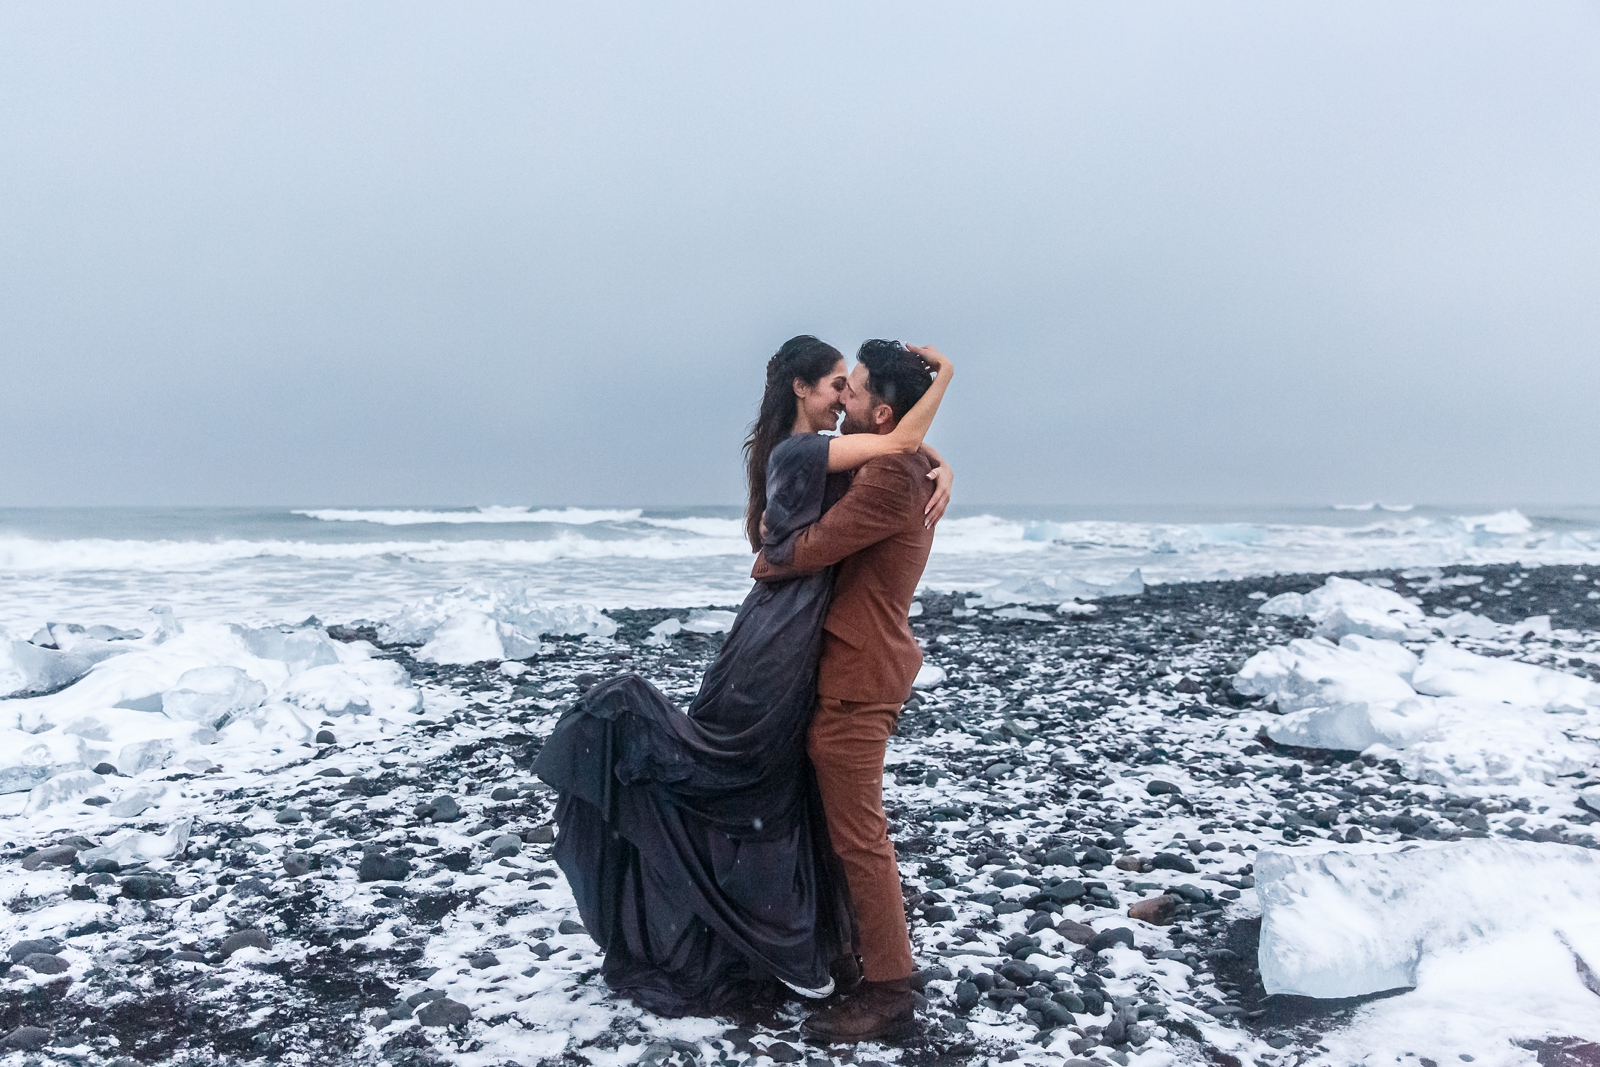 This playful couple just eloped on Diamond Beach in Iceland.